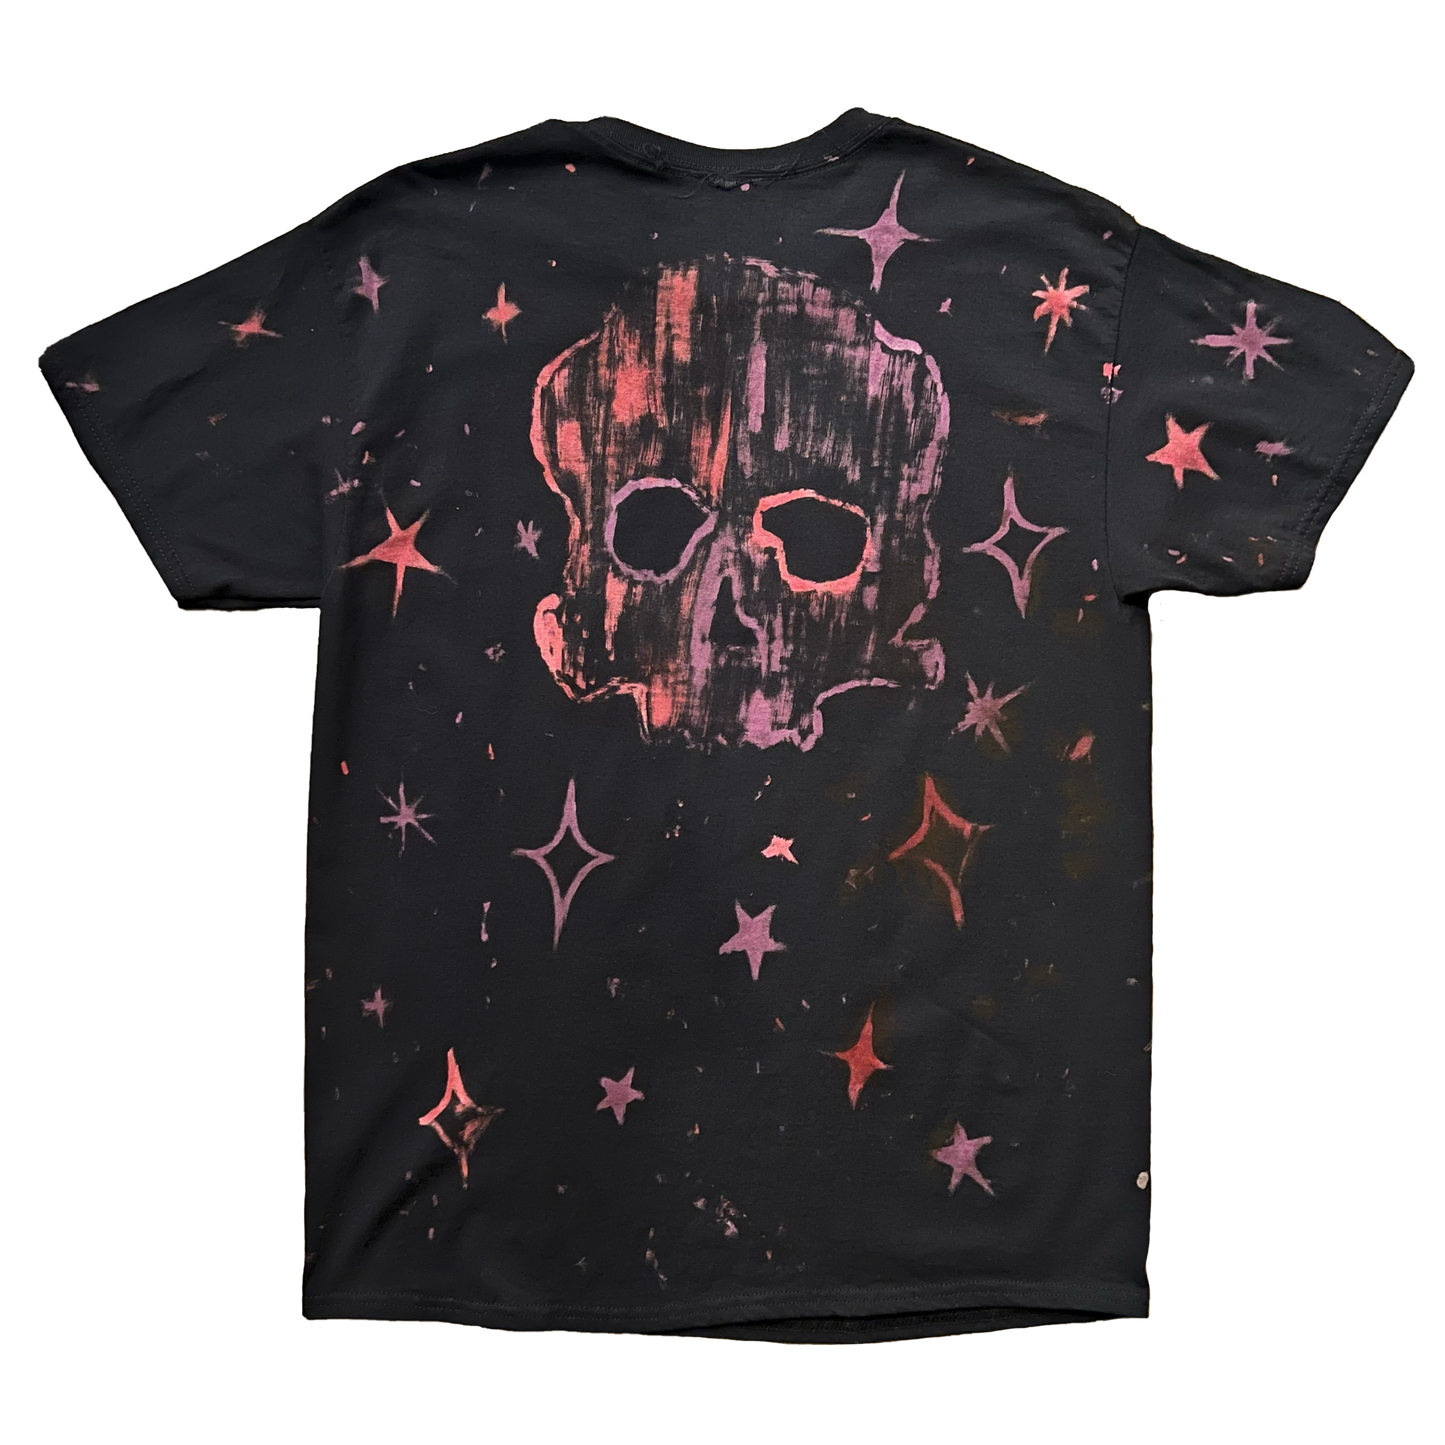 Stardust Devil Man 1/1 Experiment 002 Tee 018 Bleach Painted & Over-Dyed Black / Red / Violet / Black